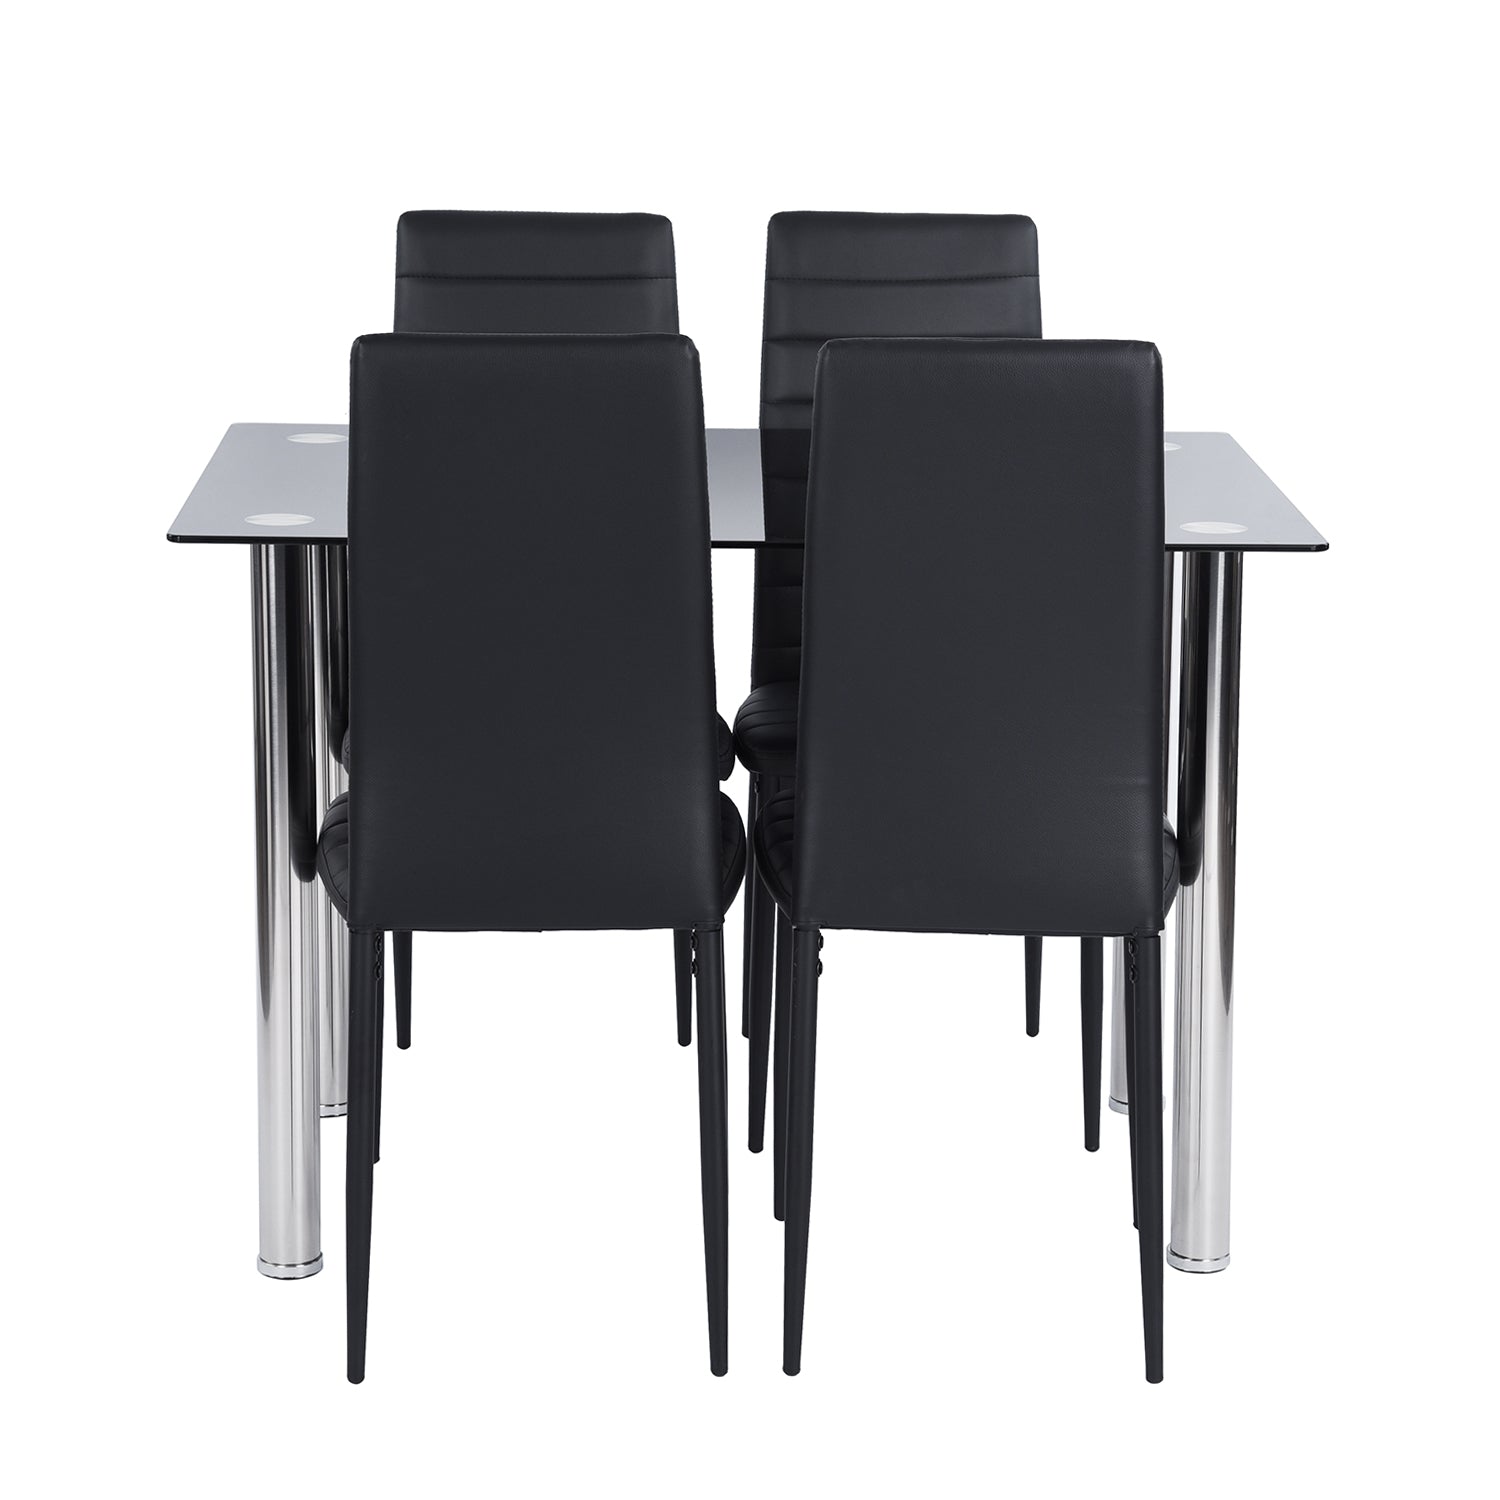 Dining Table Set, 1 Table and 4 Chairs, Scandinavian Style, Black Tempered Glass Top, Metal Structure - XACHARIA LMKZ